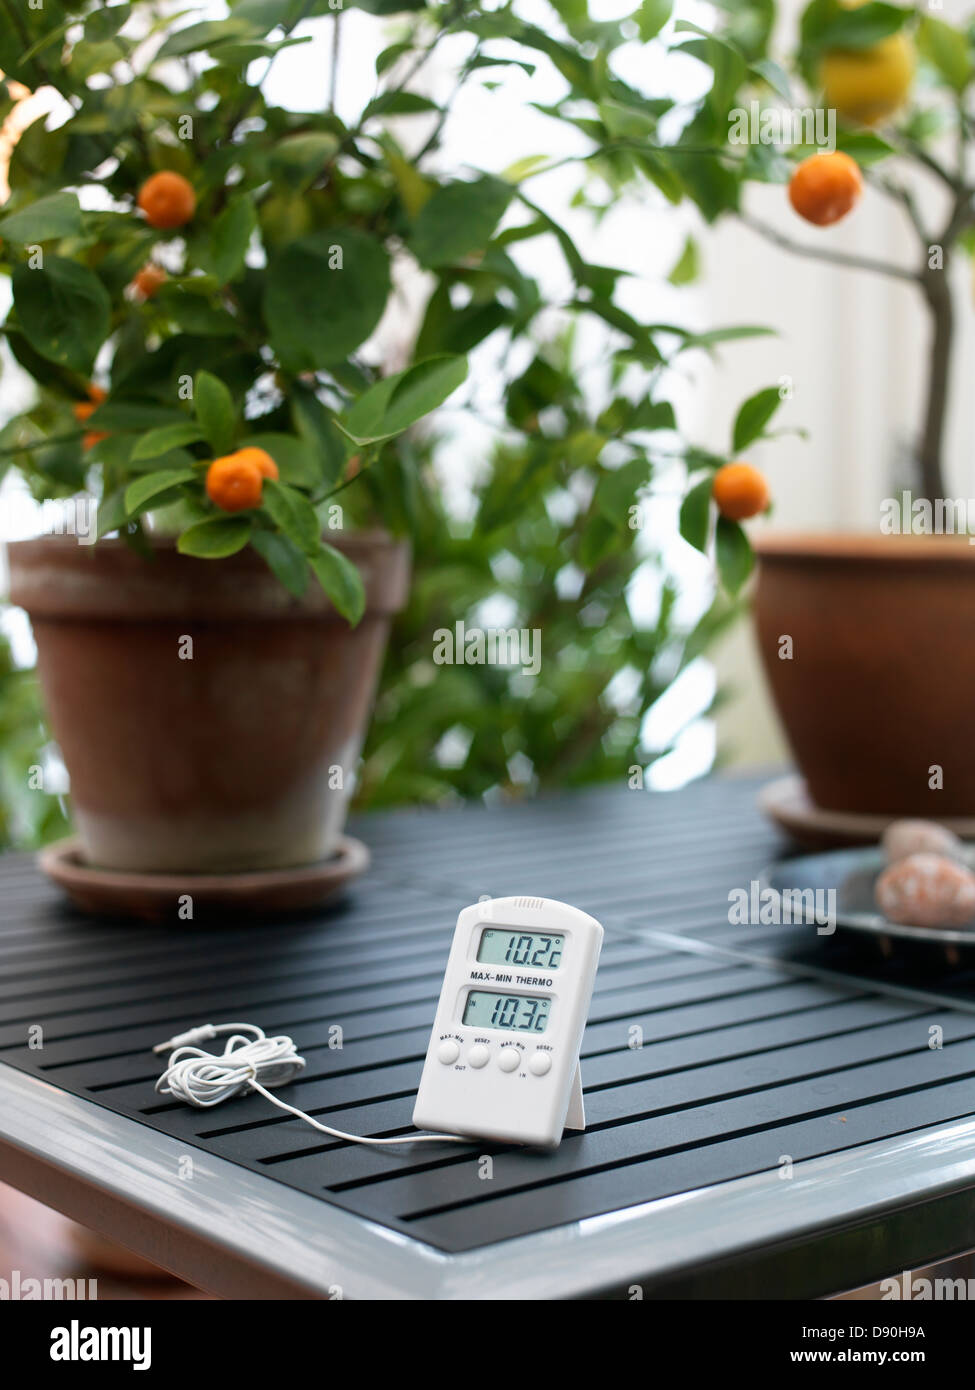 https://c8.alamy.com/comp/D90H9A/digital-thermometer-on-table-with-pot-plants-D90H9A.jpg